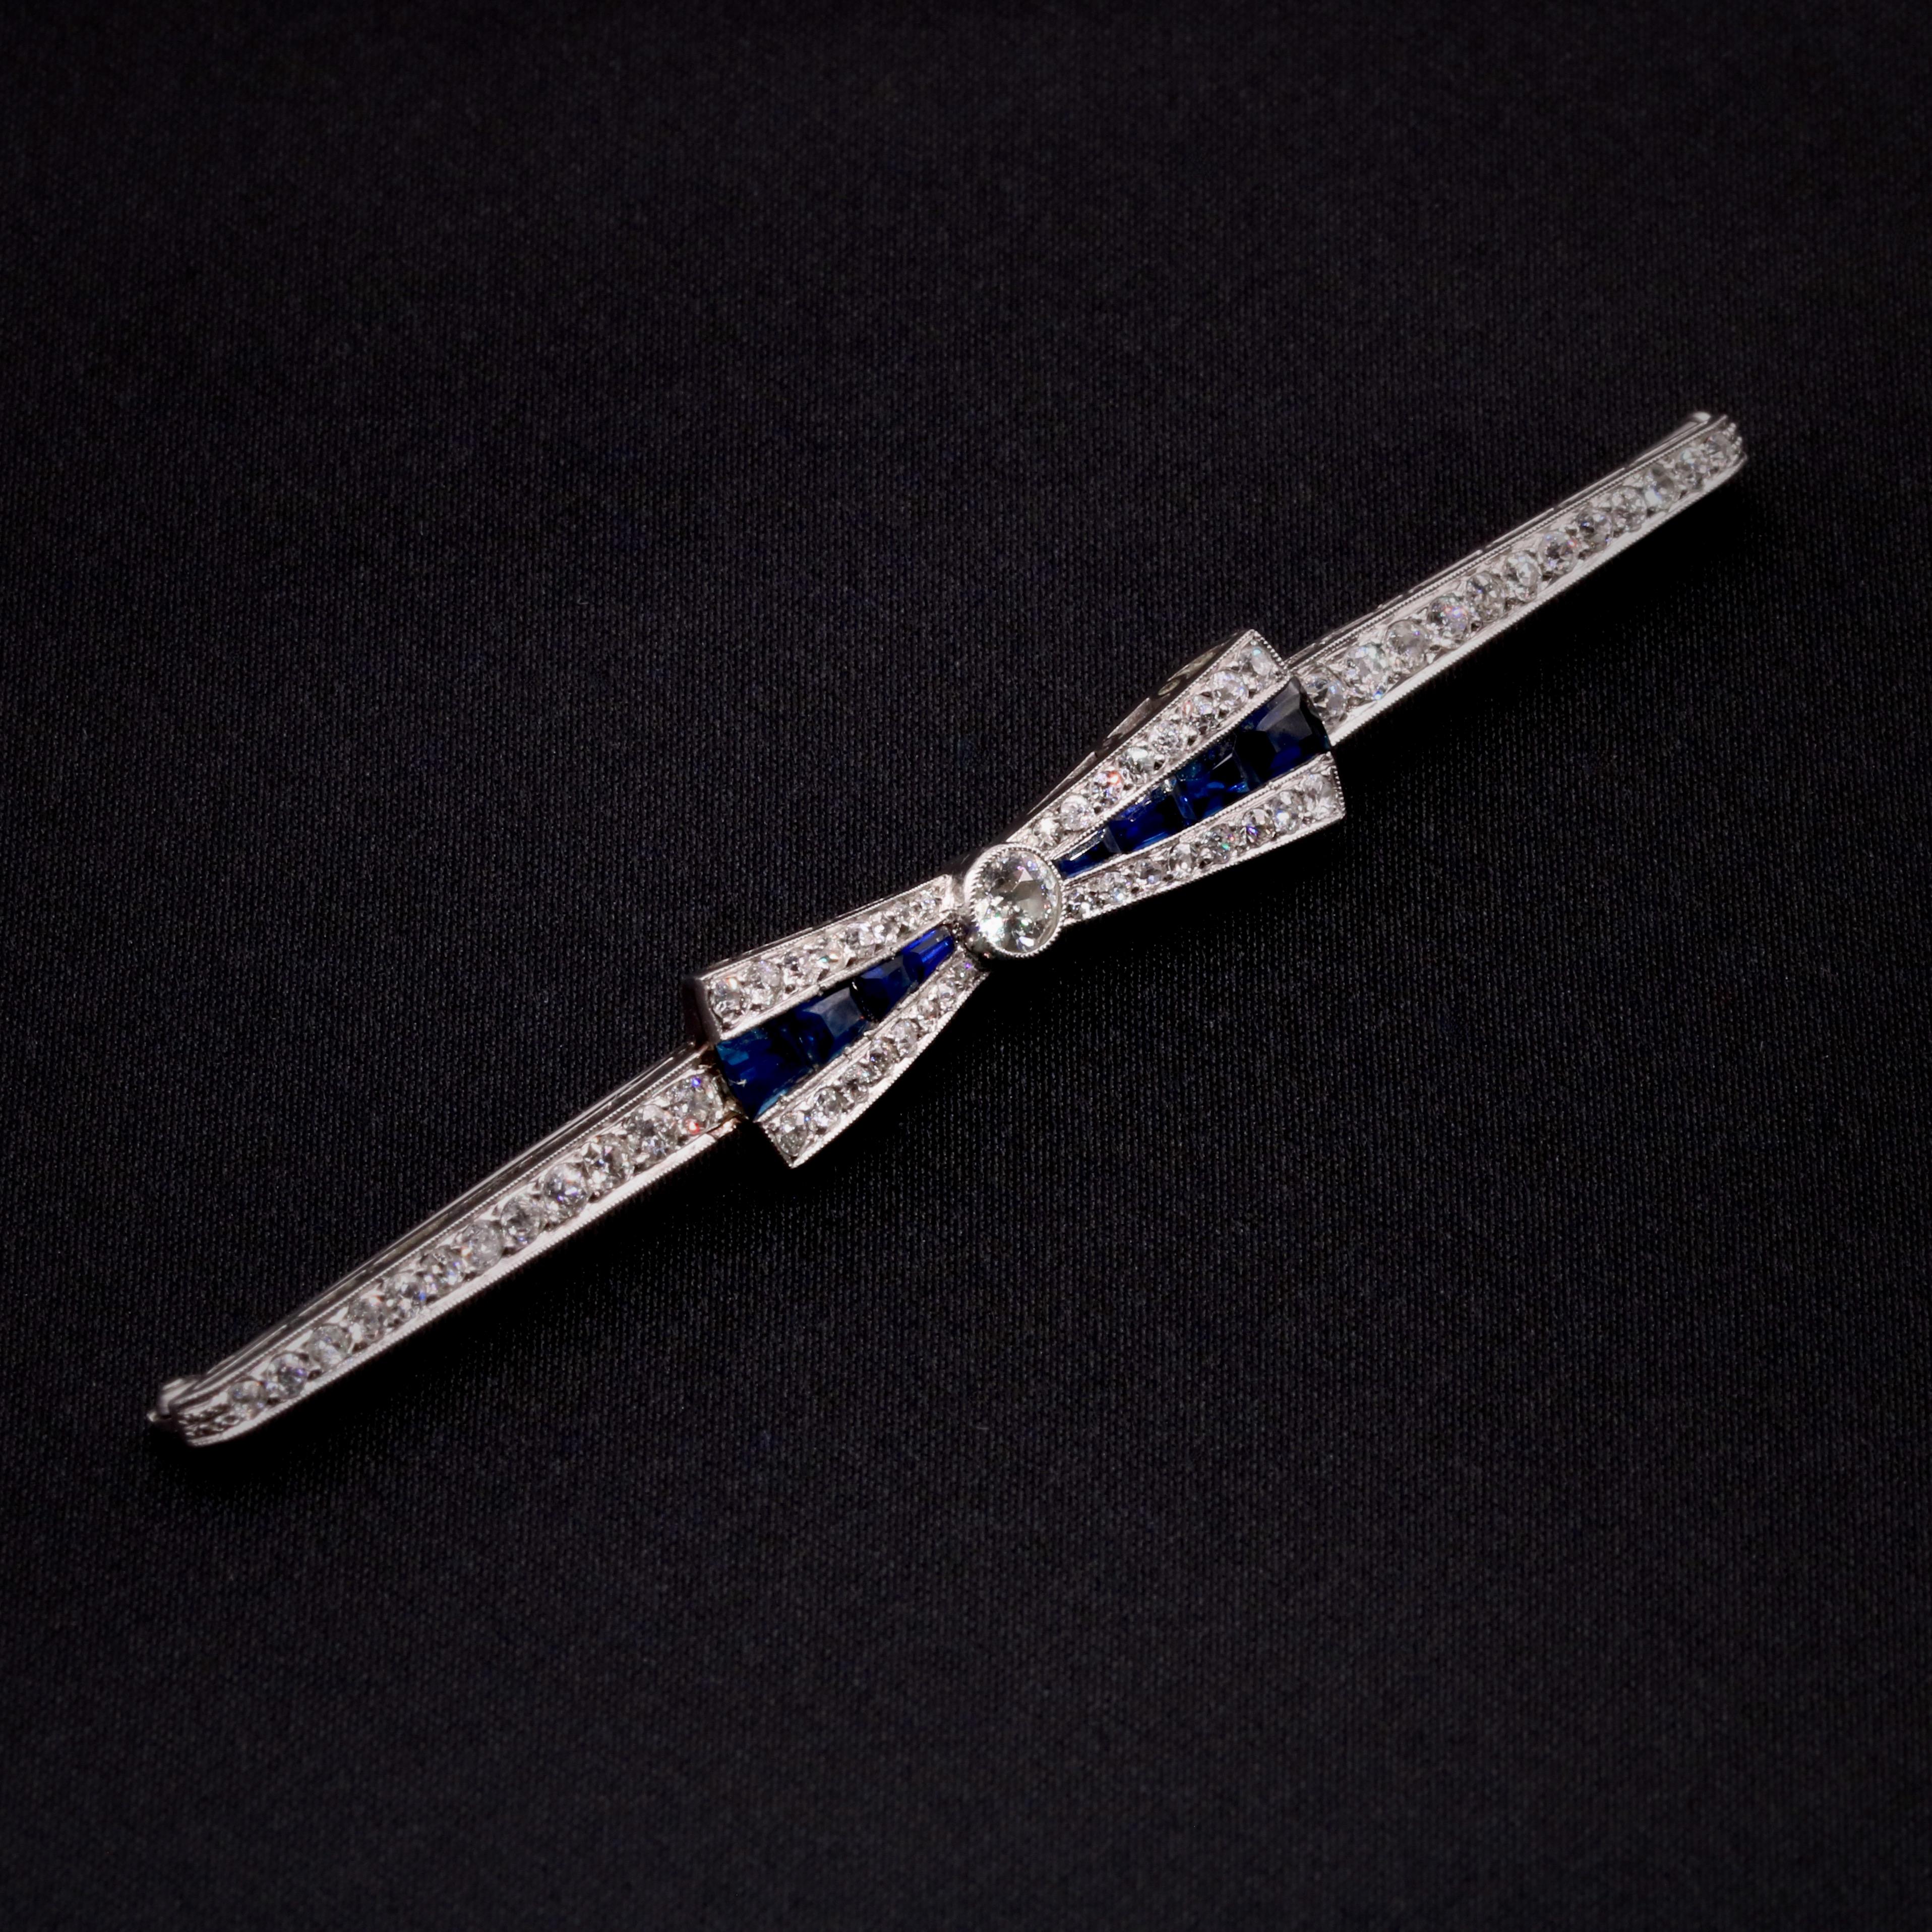 An Art Deco, sapphire, diamond, and platinum brooch, comprising eight calibre step cut blue sapphires, one large old European cut diamond, and fifty-six smaller old European and single cut diamonds, set in platinum, with platinum fittings and pin.